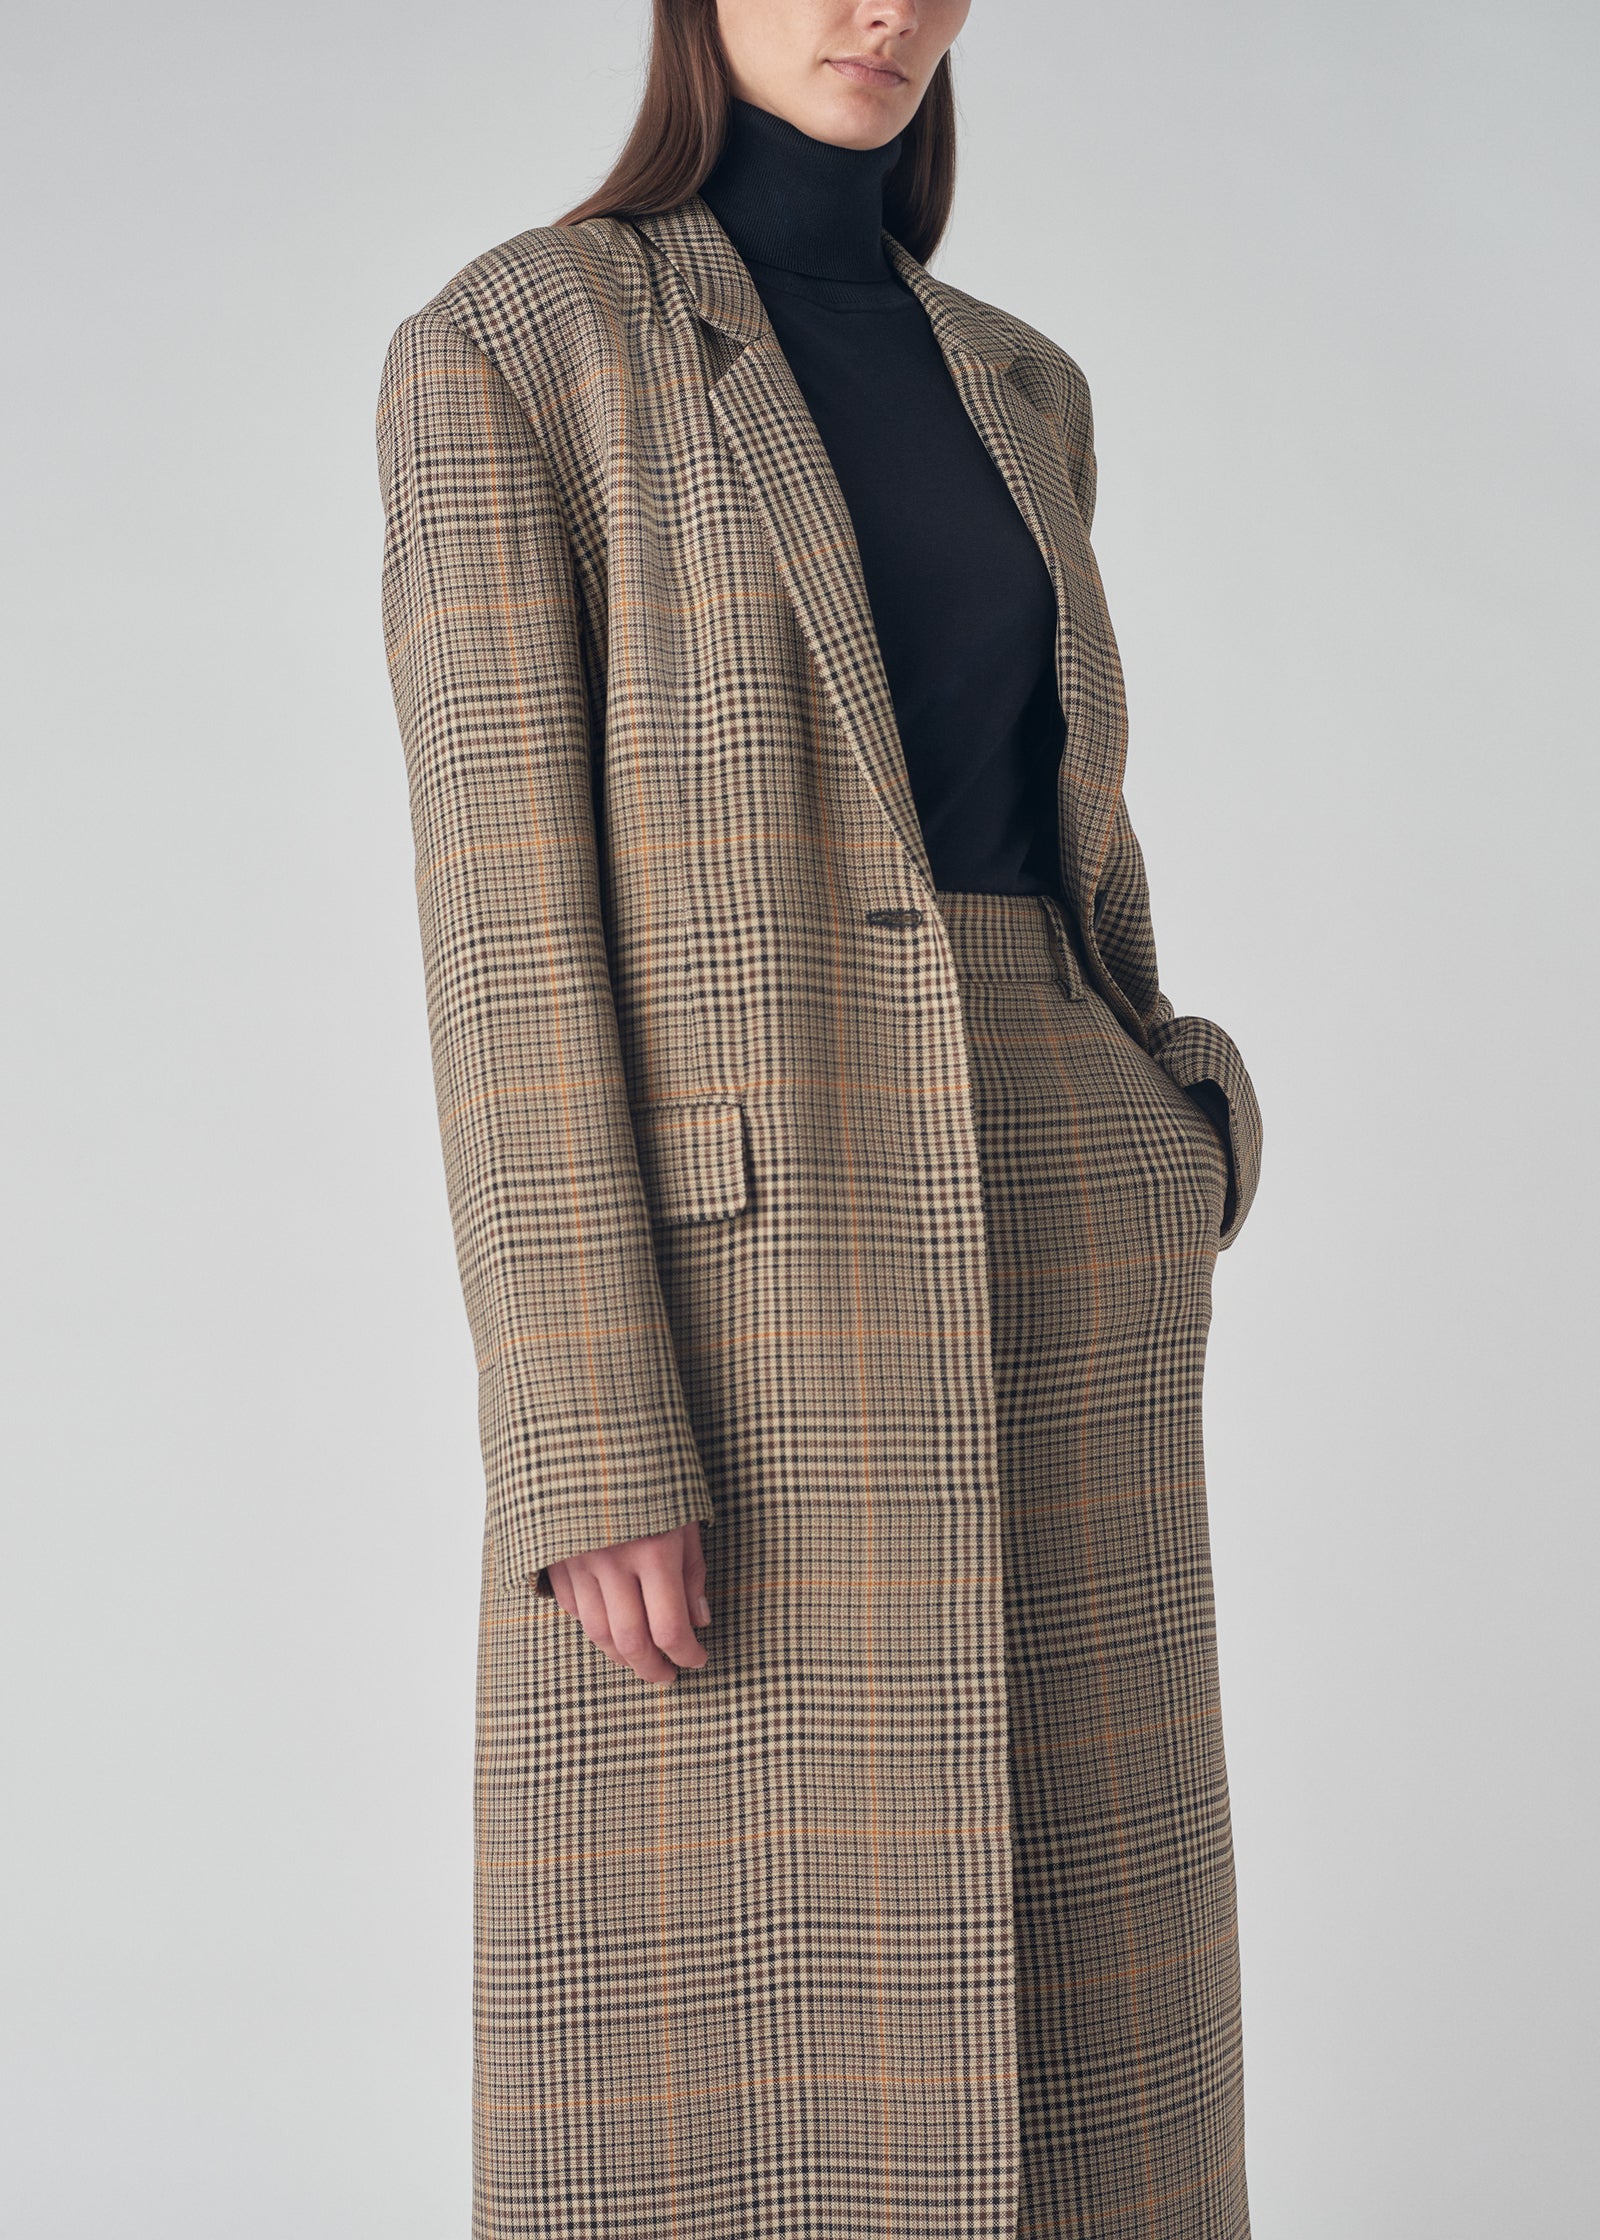 Stragith Coat in Lightweight Tweed - Brown Plaid - CO Collections